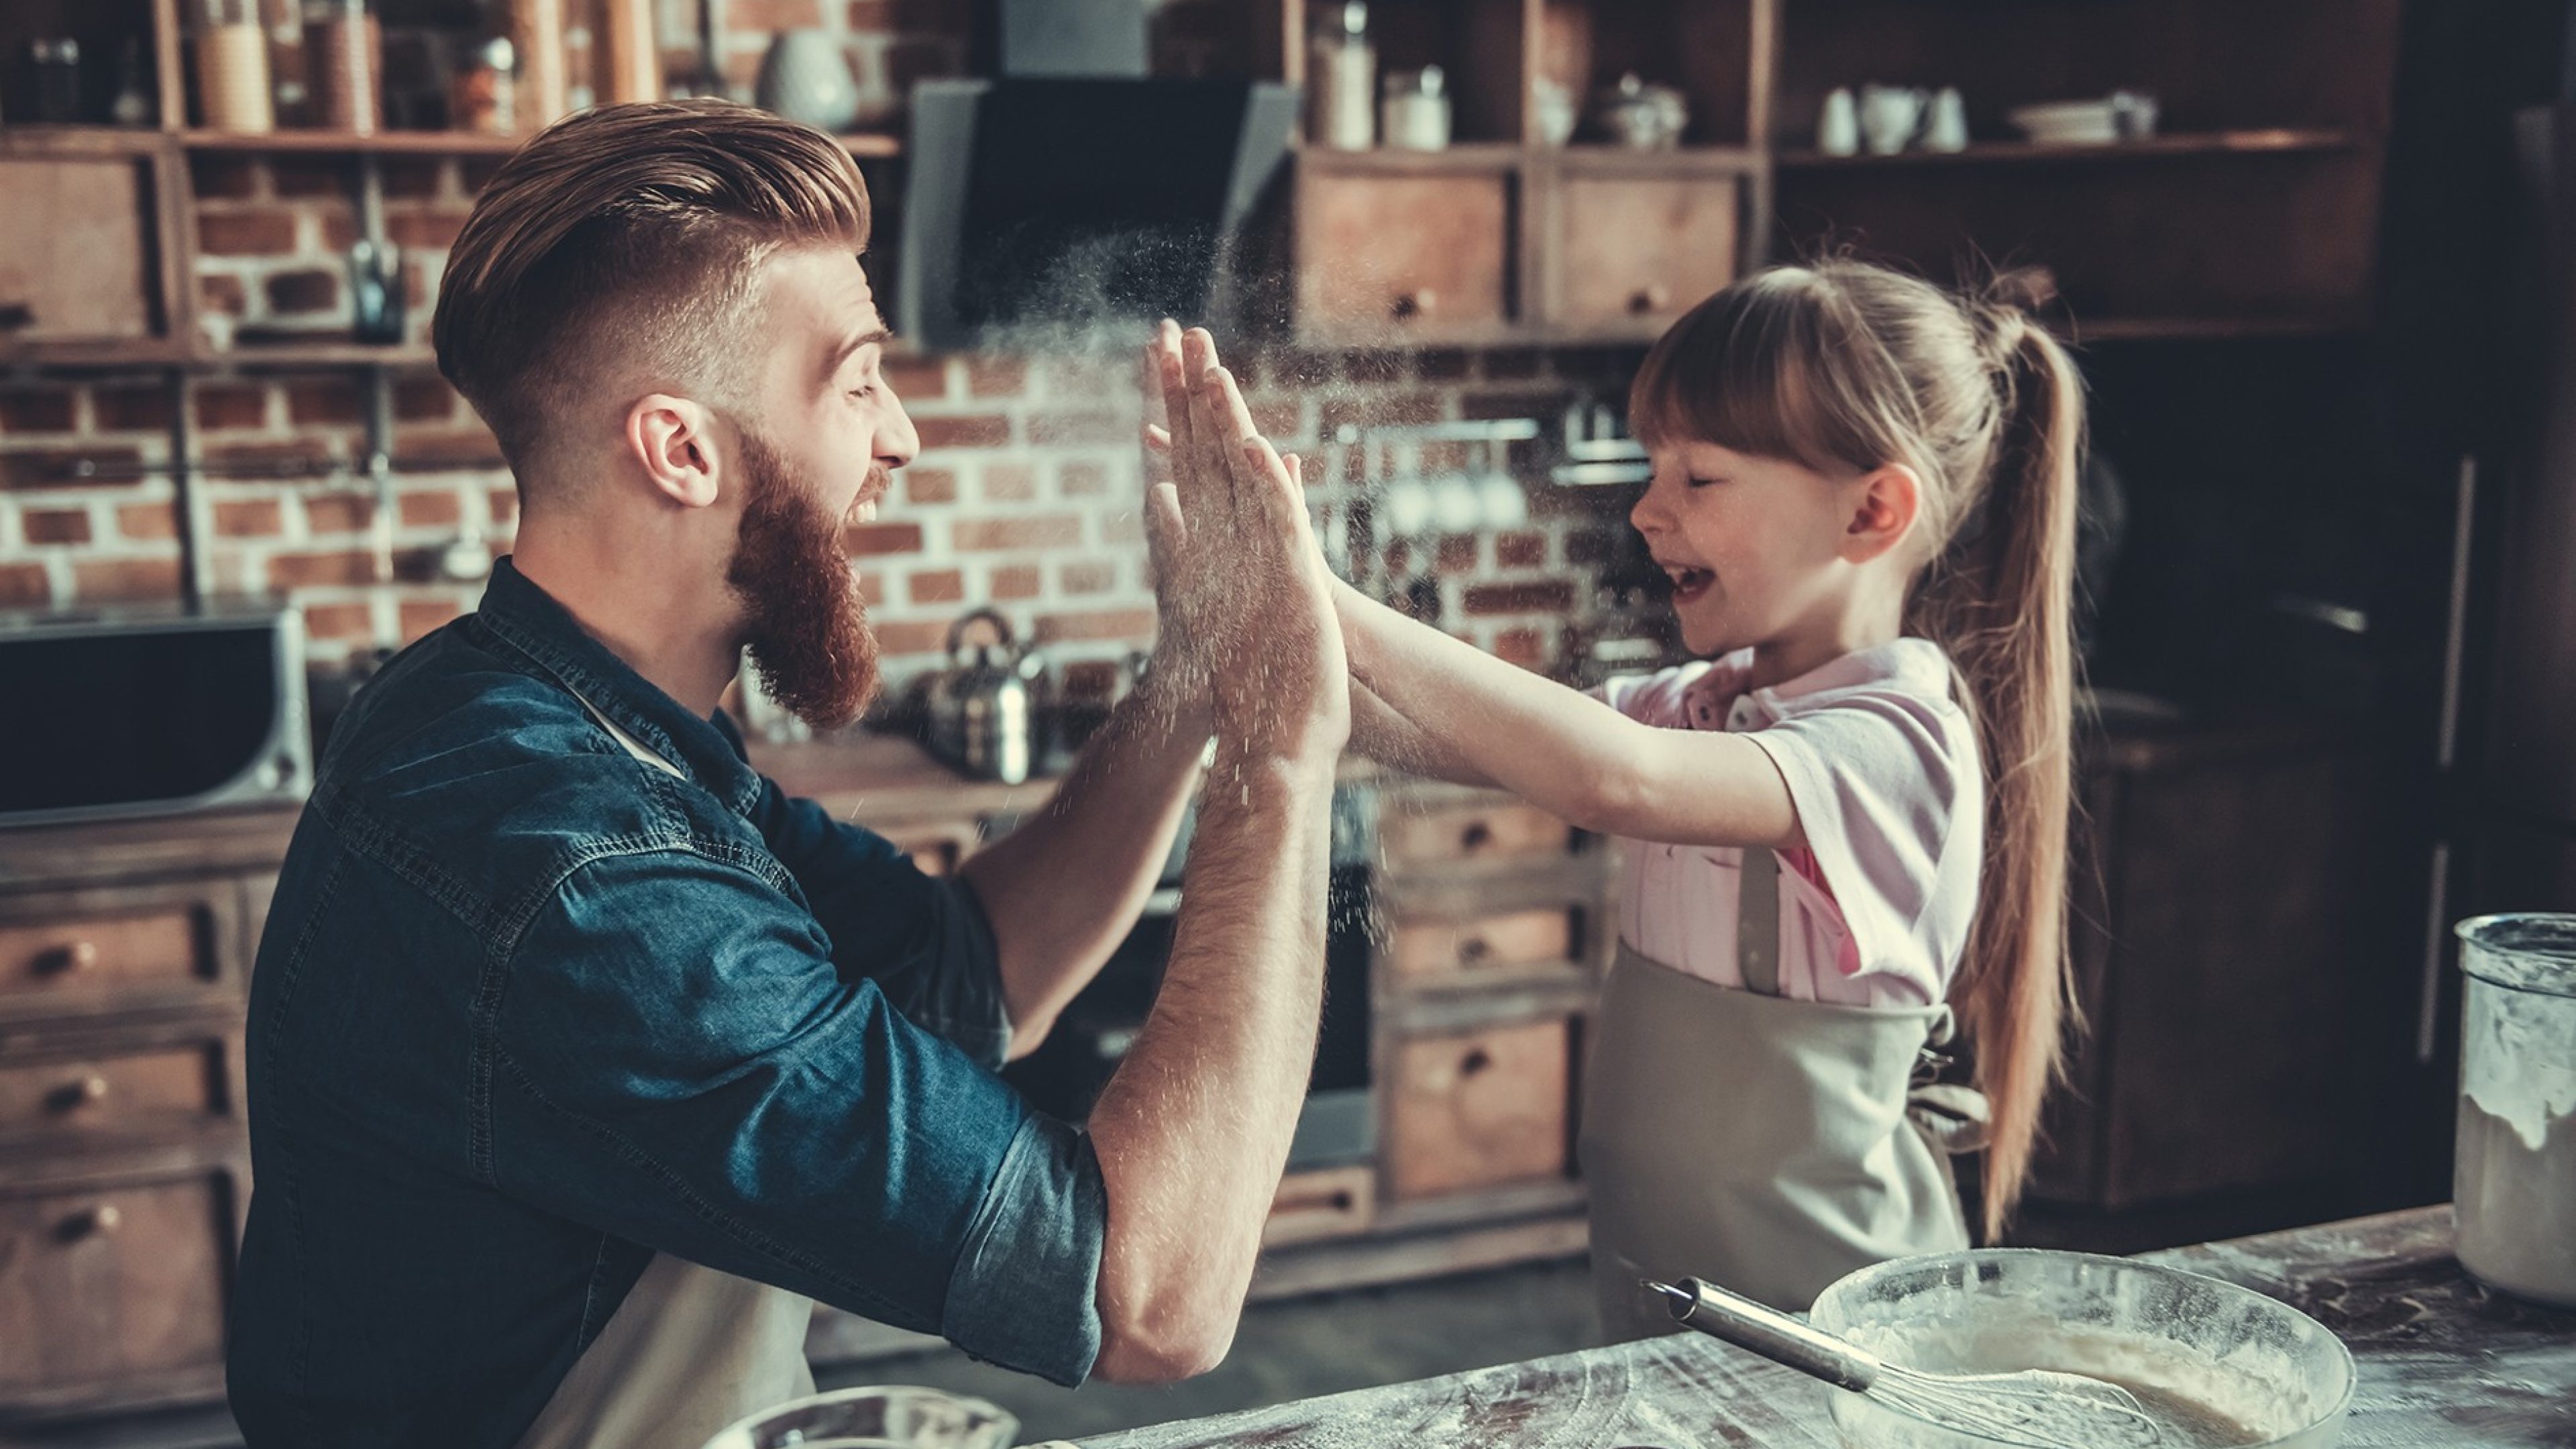 Cute little girl and her handsome bearded dad in aprons are having fun with flour, giving high five and smiling while cooking in kitchen